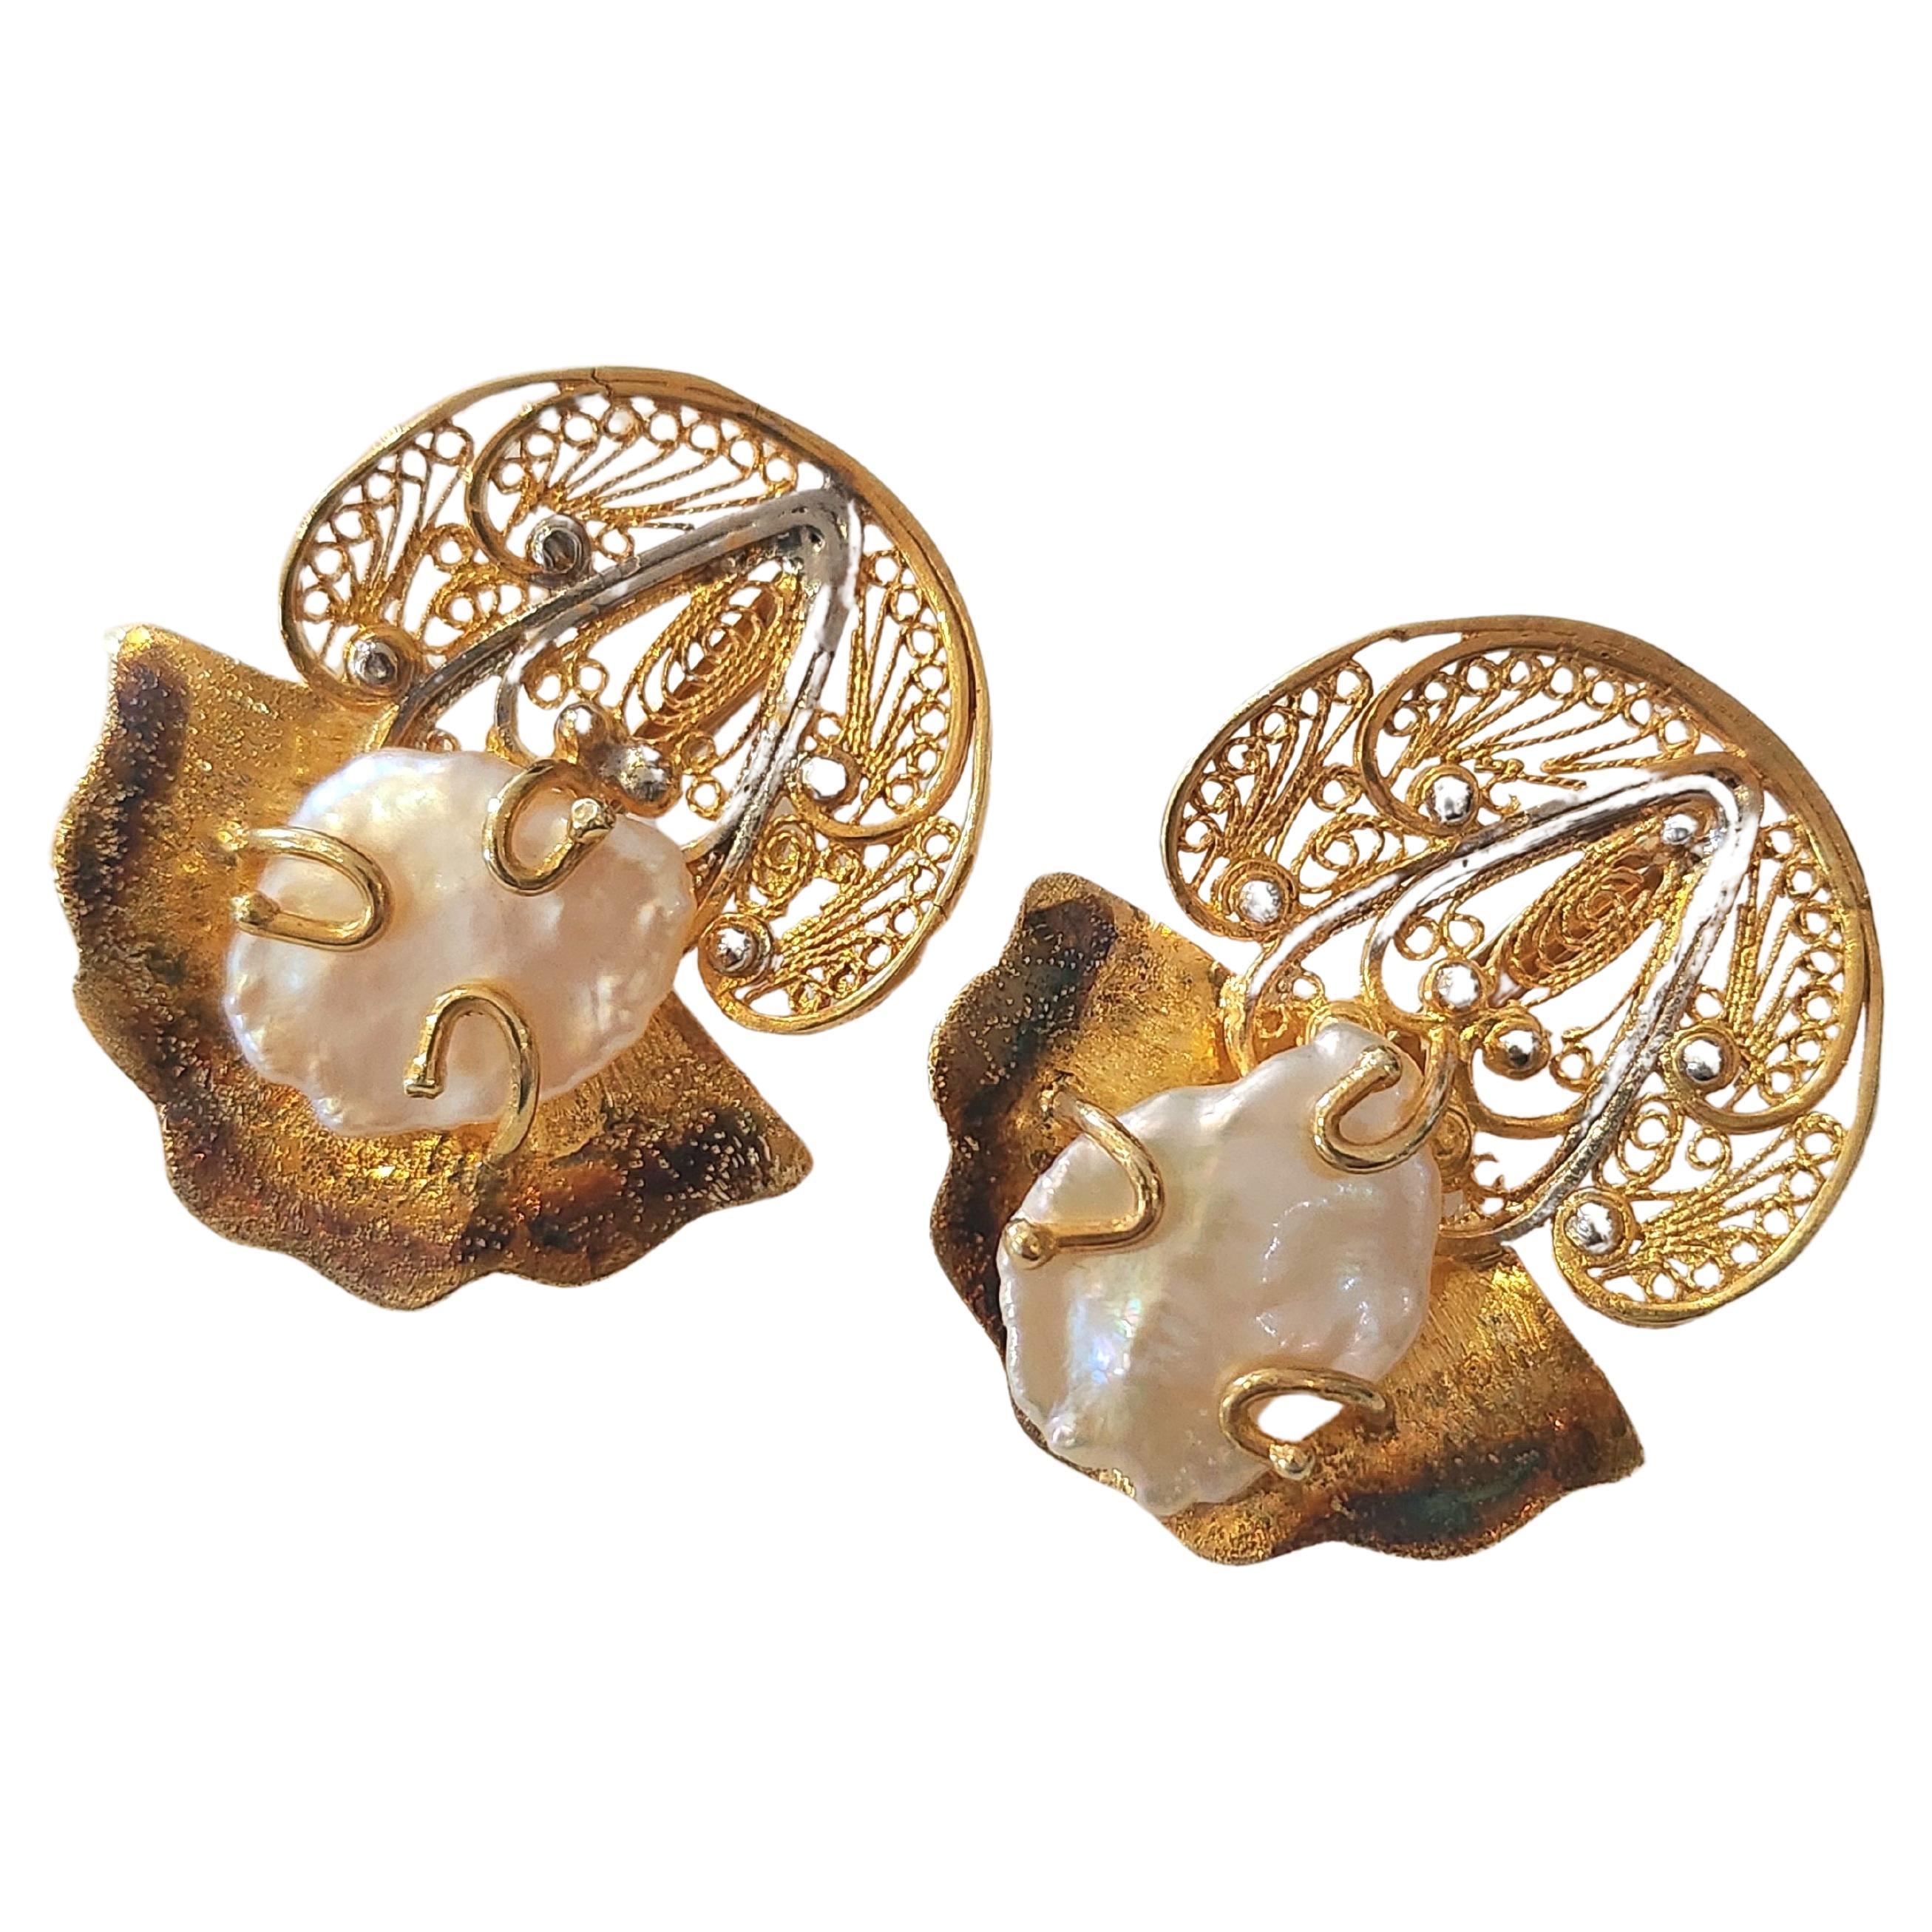 Contemporary large hand made silver earrings 925 gold plated with 750k gold in byzantine open work style centered with nutaral pearls decorated with enamel with total earrings weight 16 grams 